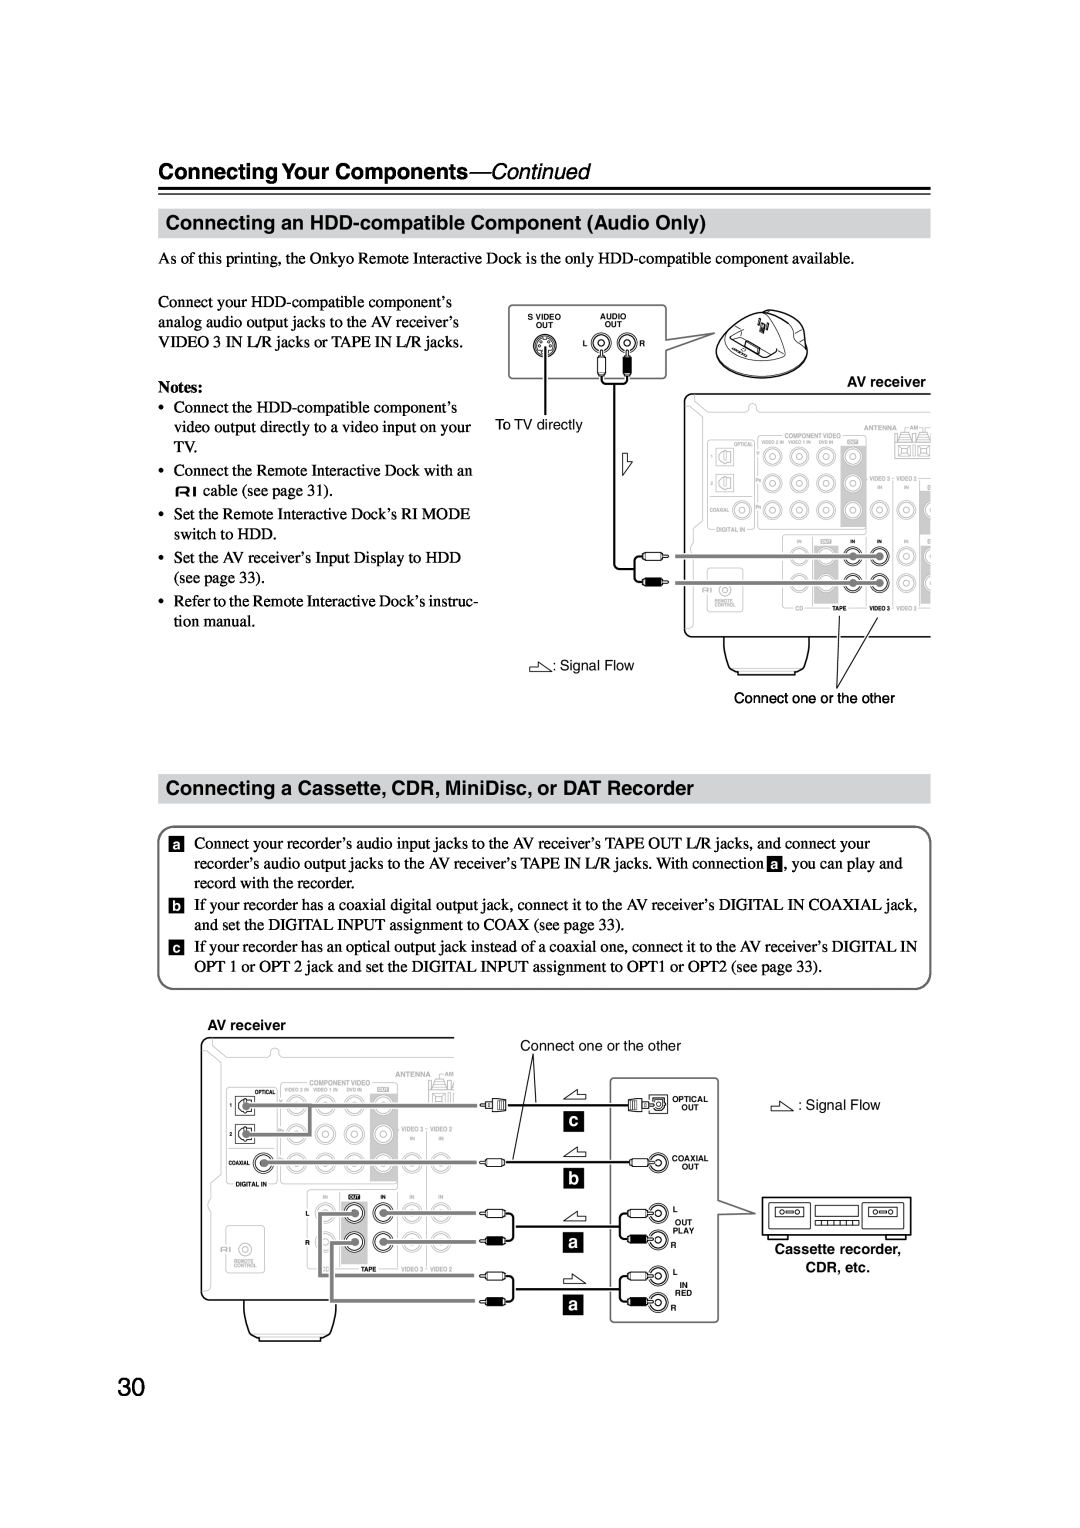 Onkyo TX-SR304 instruction manual Connecting an HDD-compatibleComponent Audio Only, Connecting Your Components-Continued 